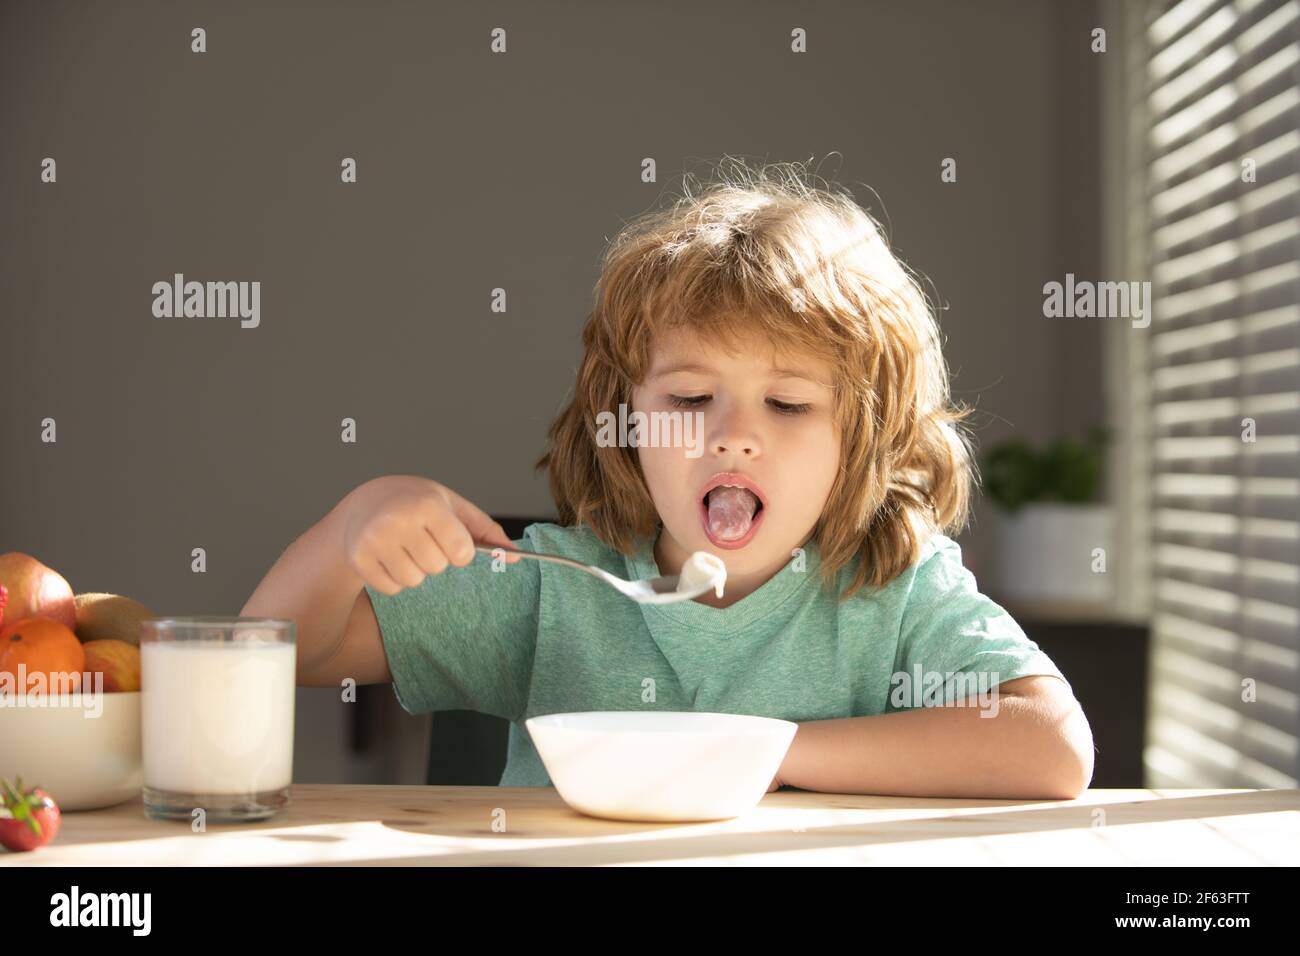 Little healthy hungry baby boy eating soup from with spoon. Child nutrition concept. Stock Photo